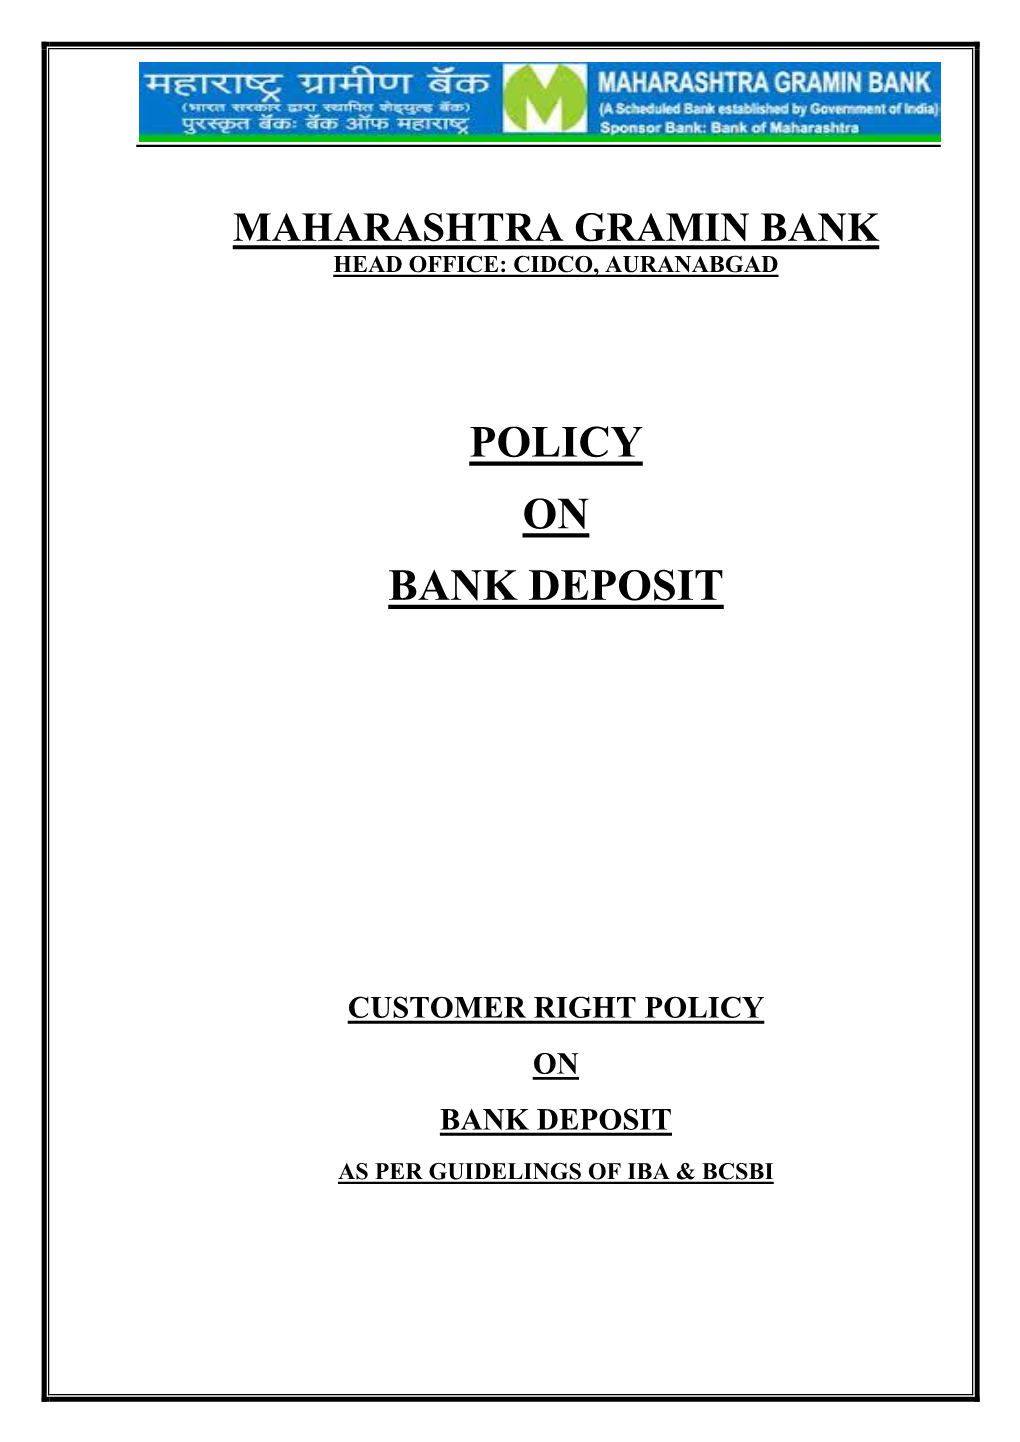 Policy on Bank Deposit